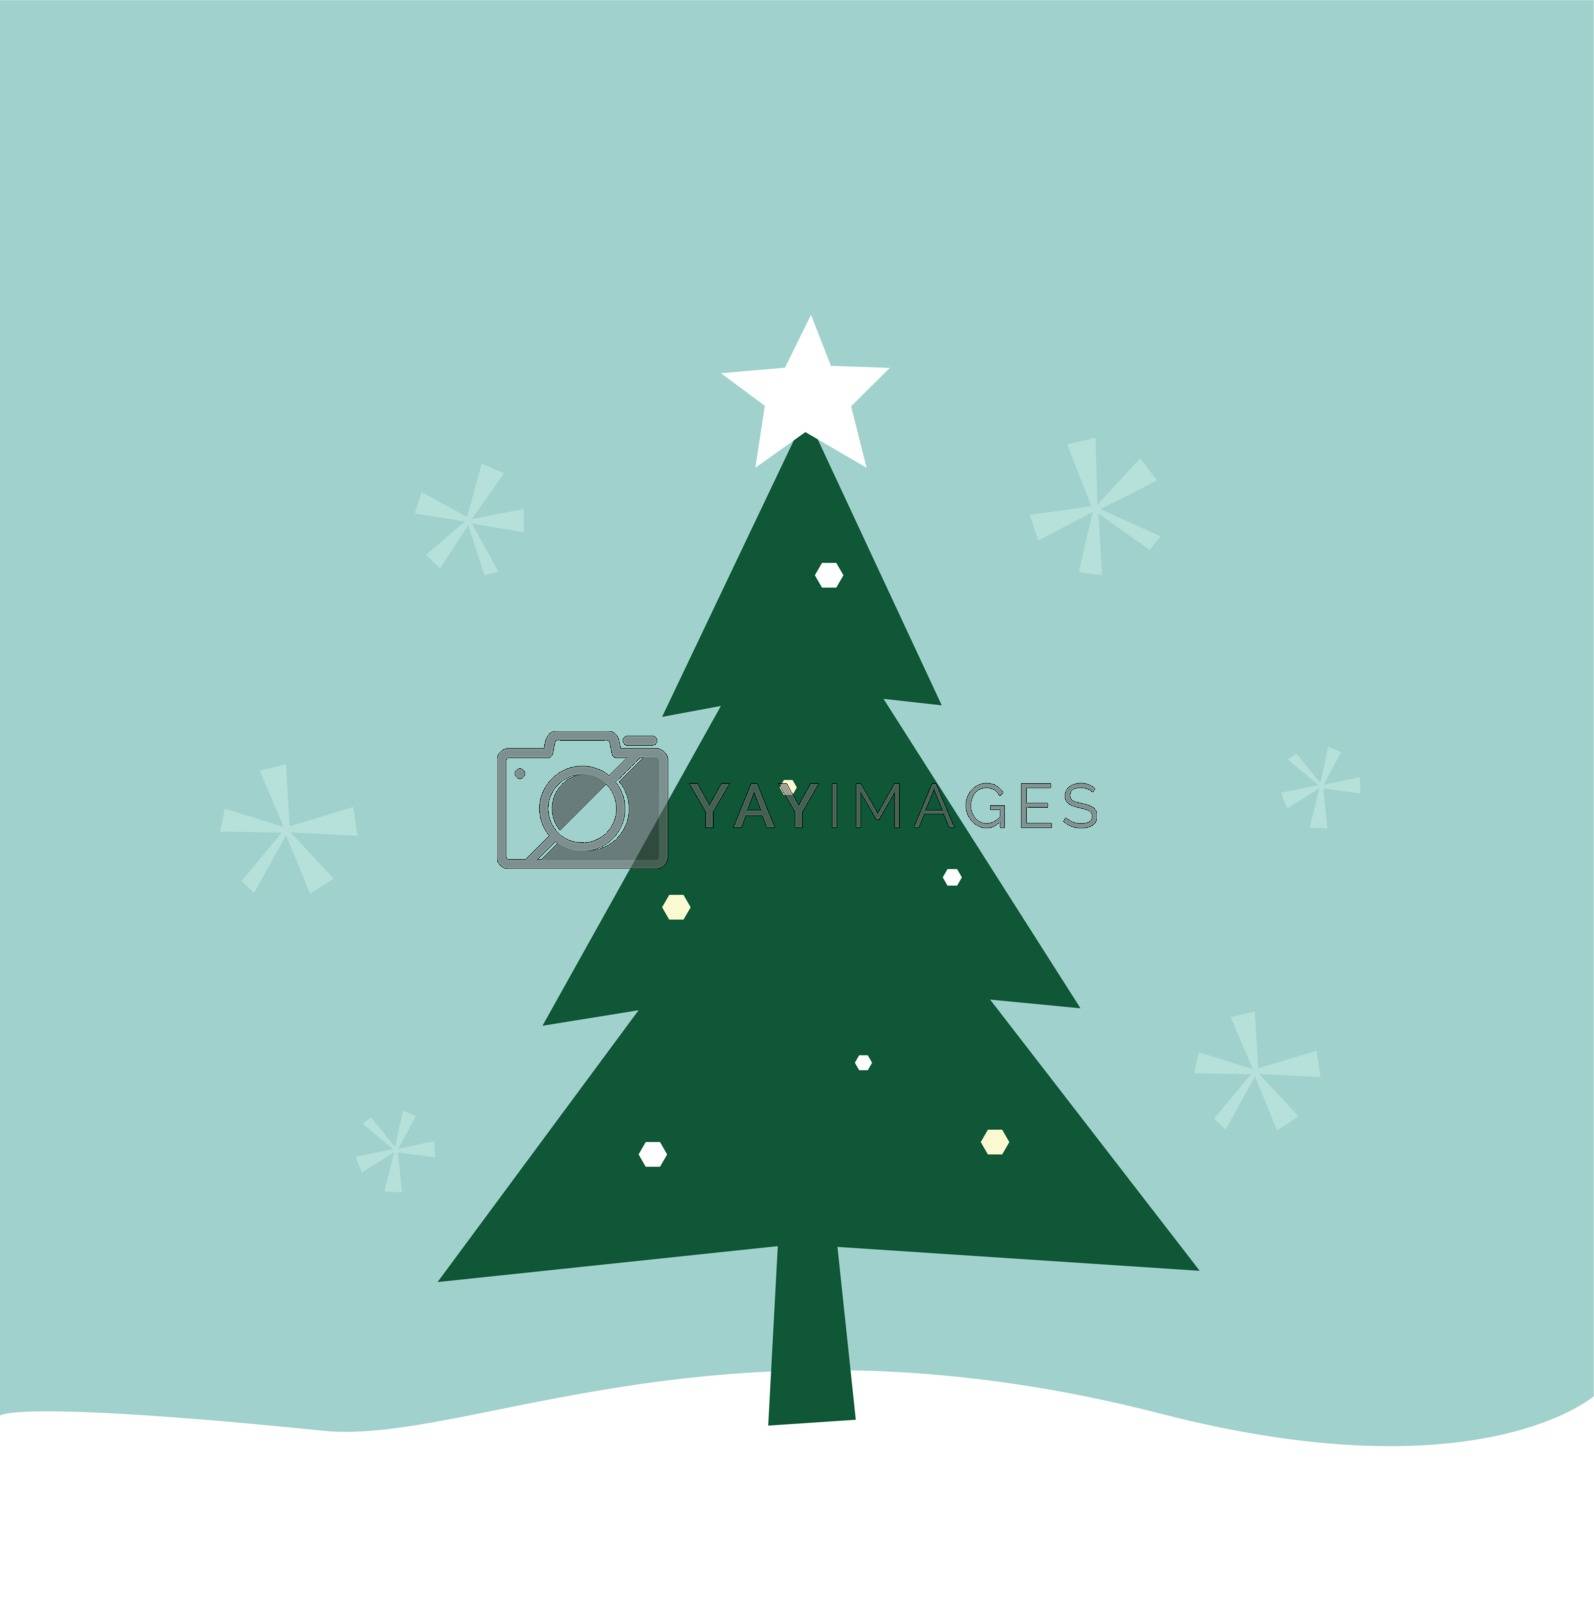 Royalty free image of Retro winter Merry Christmas Tree  by Lordalea